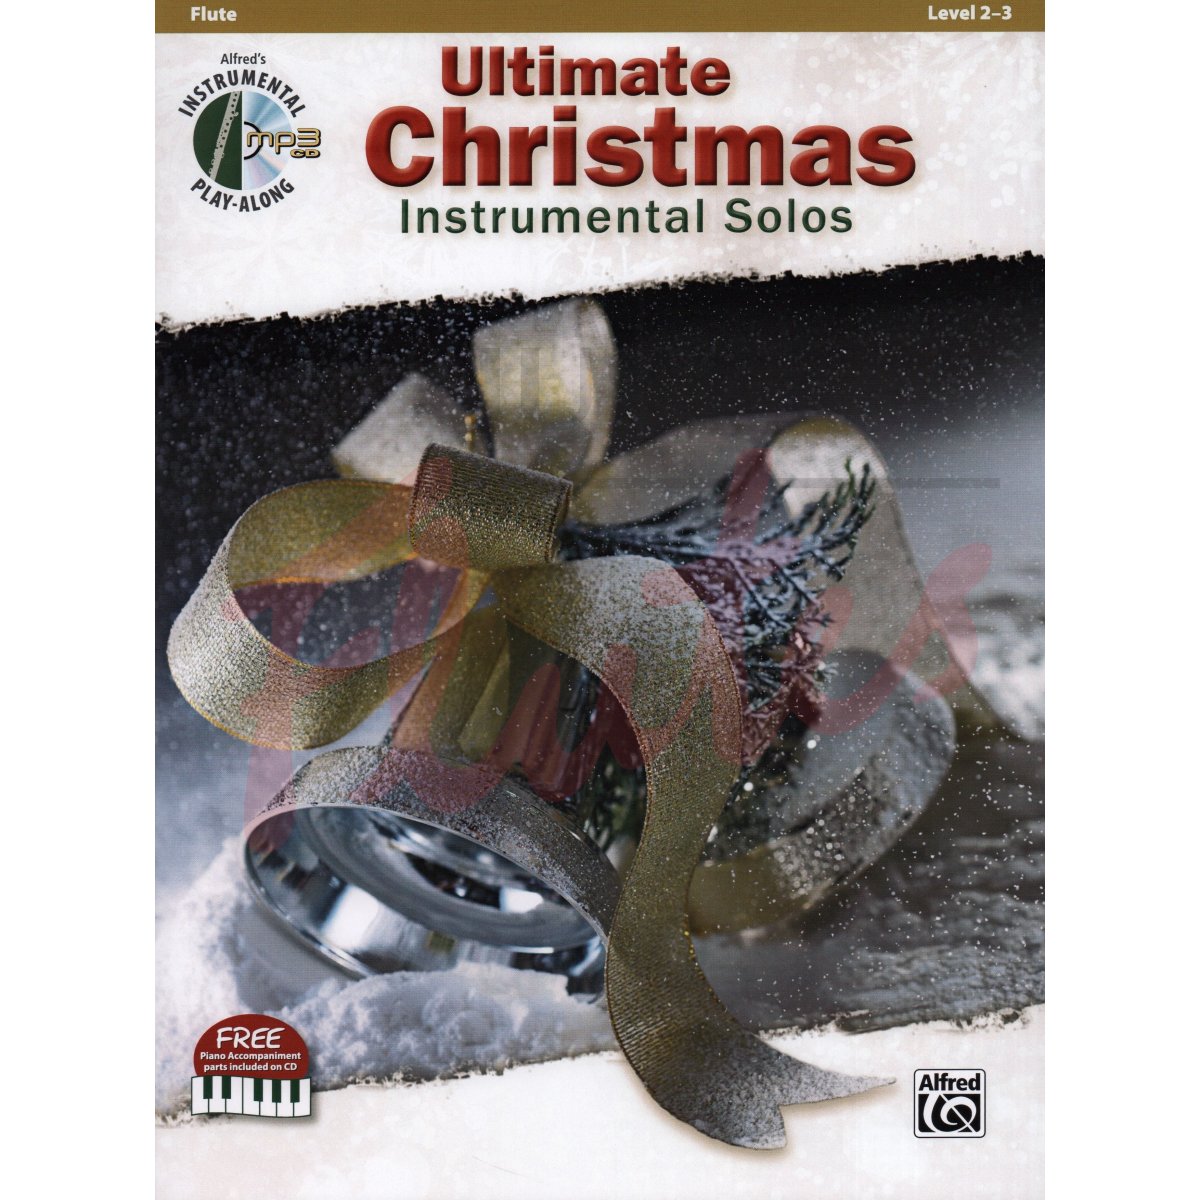 Ultimate Christmas Instrumental Solos for Flute